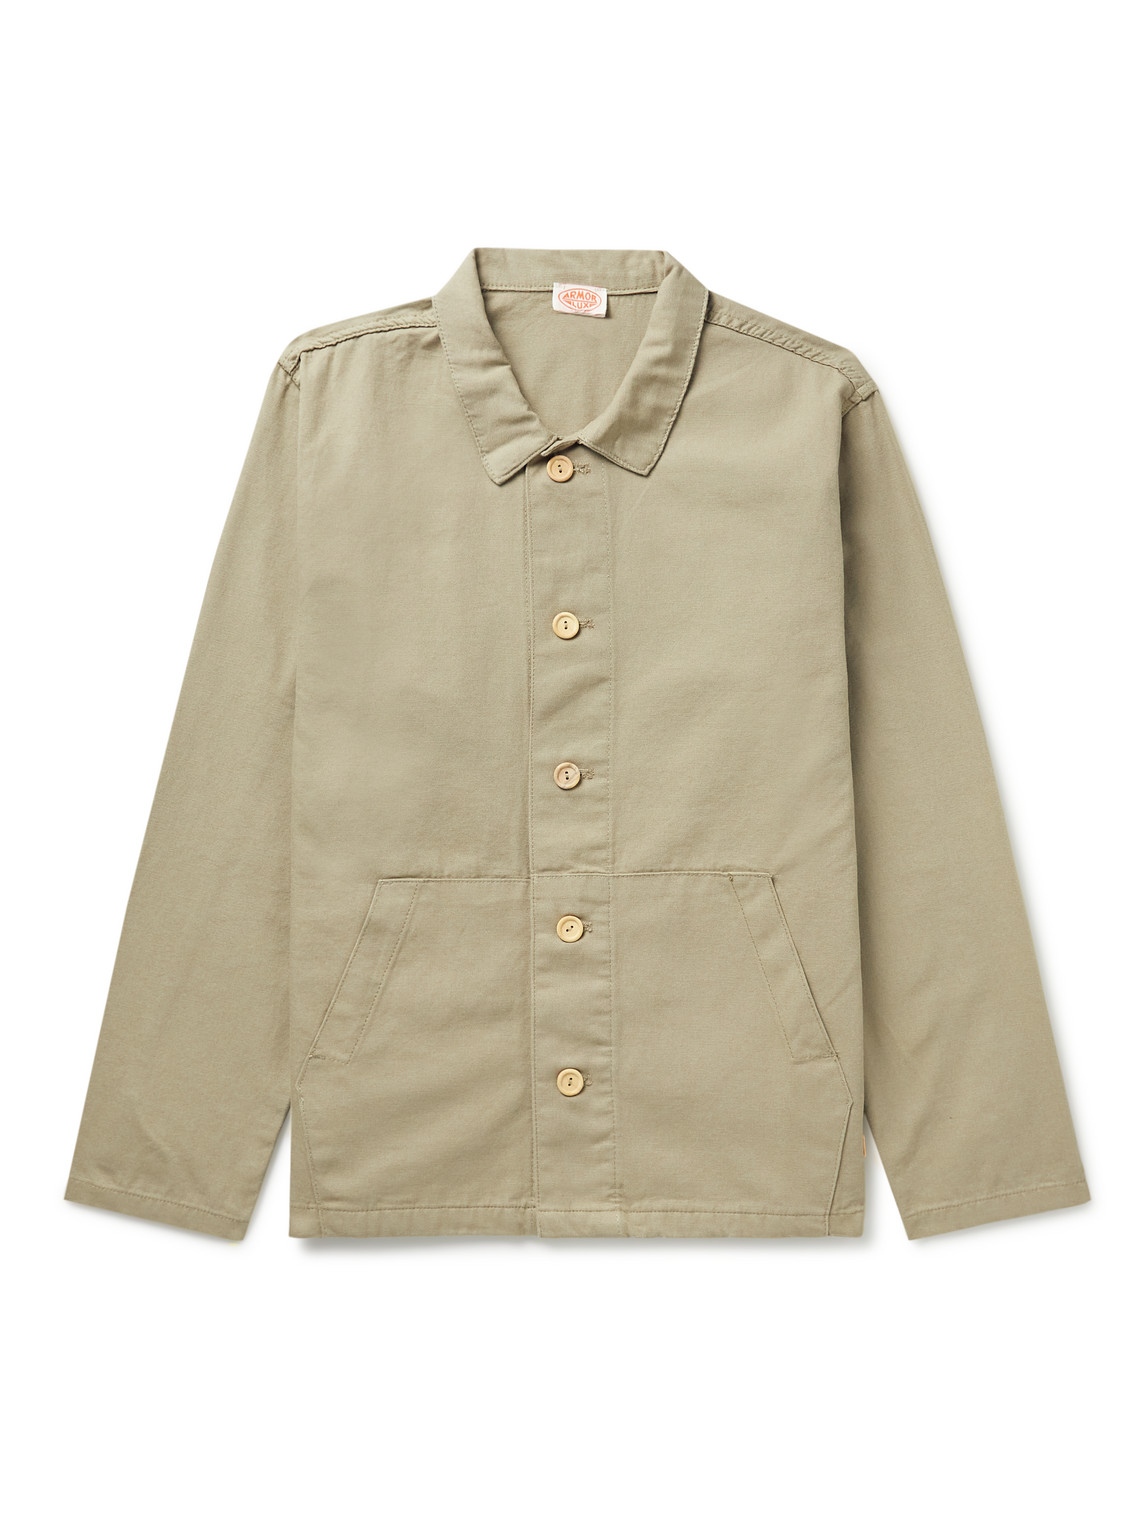 Armor-lux Heritage Cotton Canvas Fisherman Jacket In Neutrals